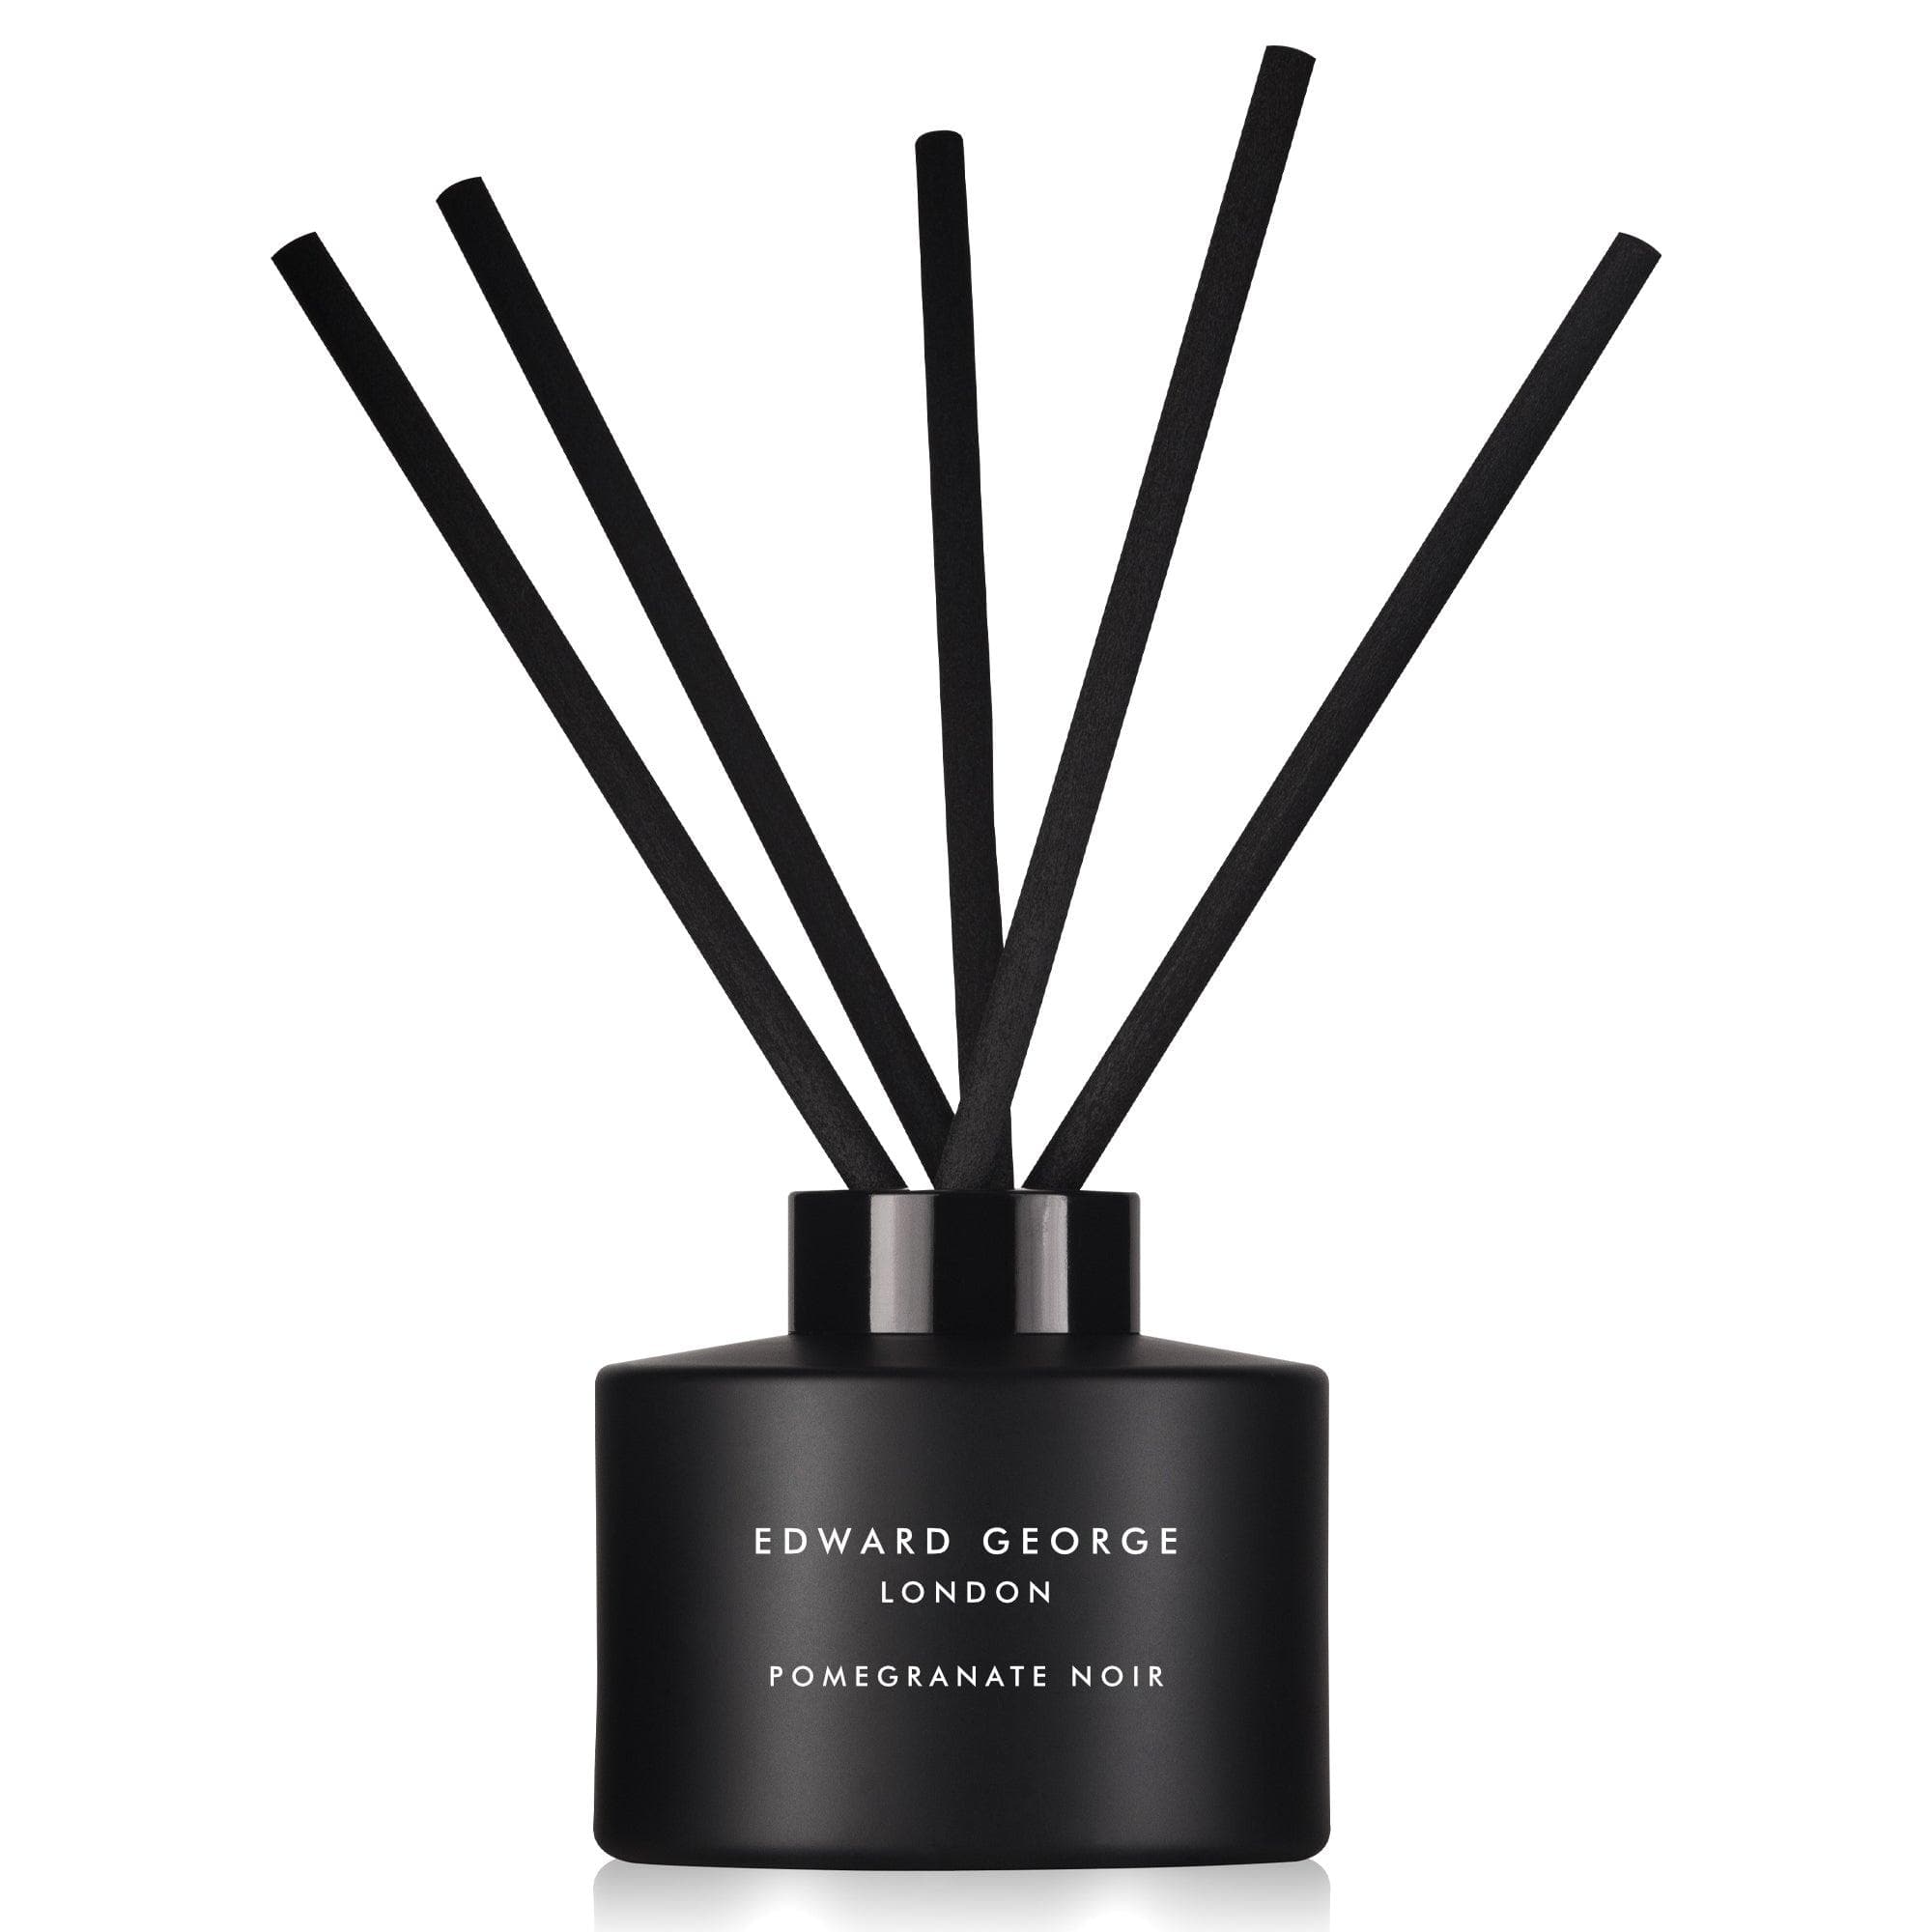 pomegranate noir reed diffusers refills home fragrance decor room edward george london infographic luxury gift ritual scented england sticks scent oil diffuser refill women men black